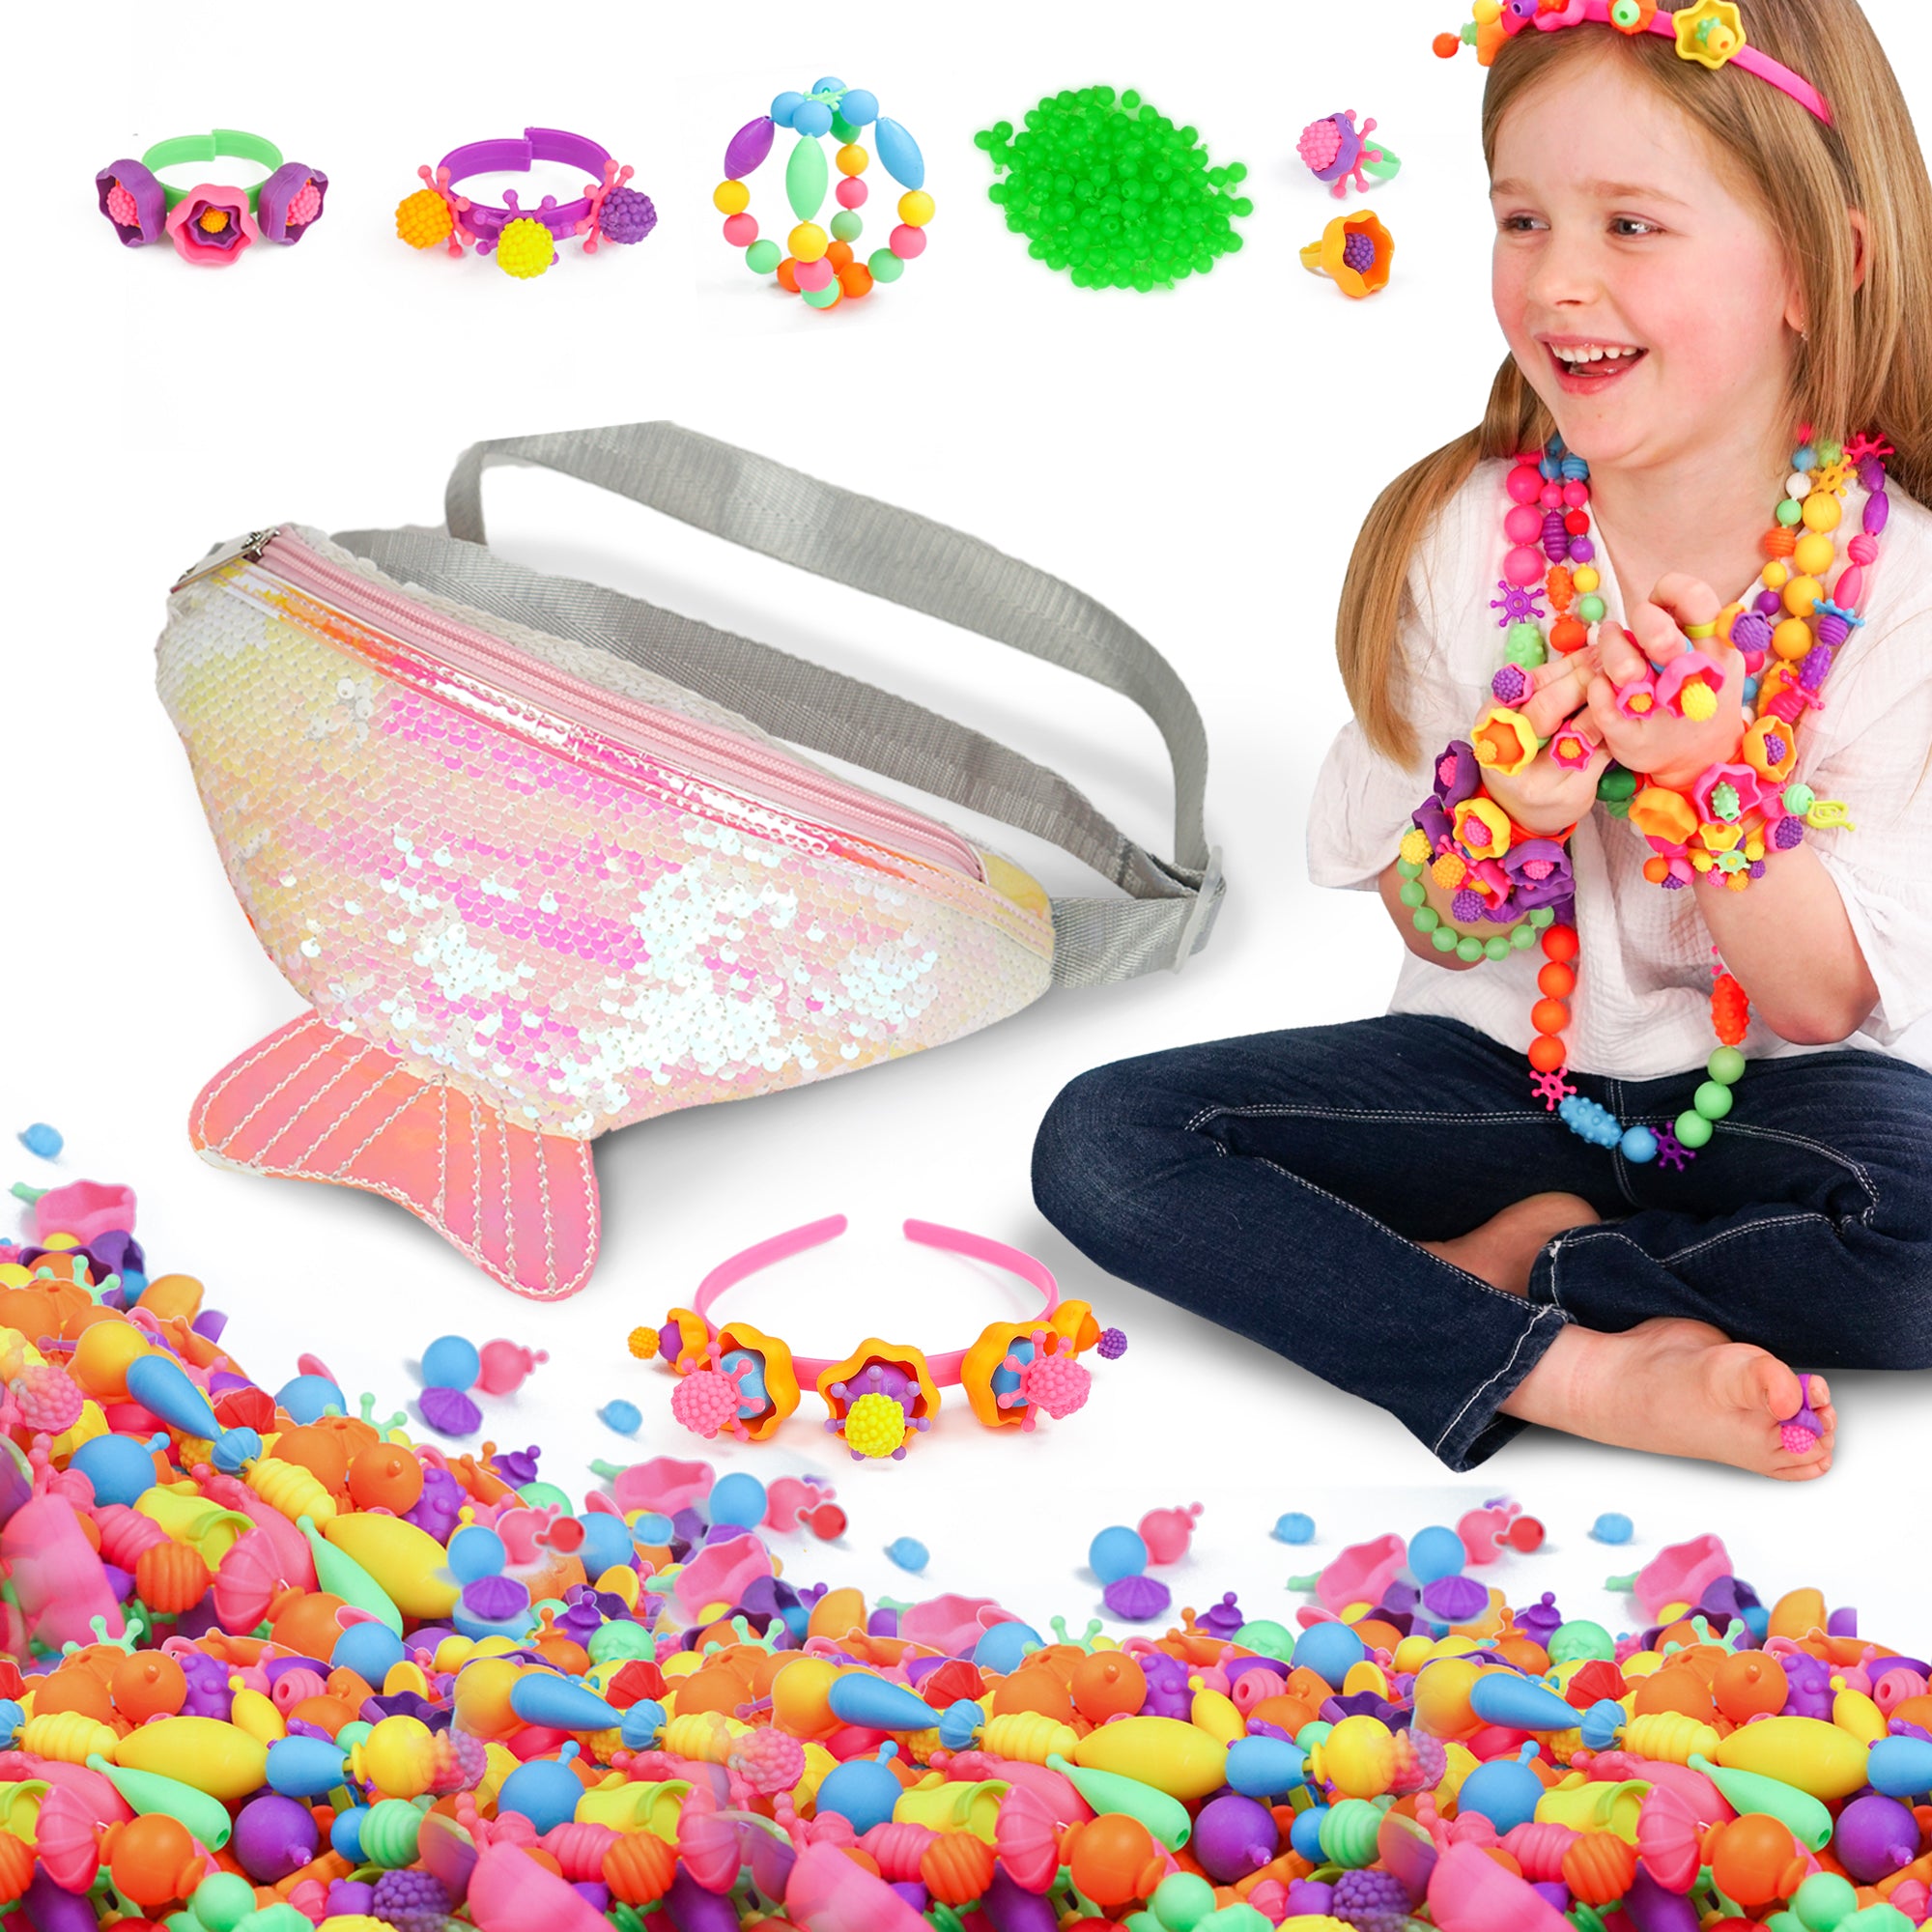 100Snap Pop Beads For Kids Jewelry Making - Kids Crafts For Kids Ages 4-8,  6-8, Arts And Crafts Supplies, Kids Toys For Girls 3 4 5 6 7 8 9 Year Old  Girl Birthday Gifts